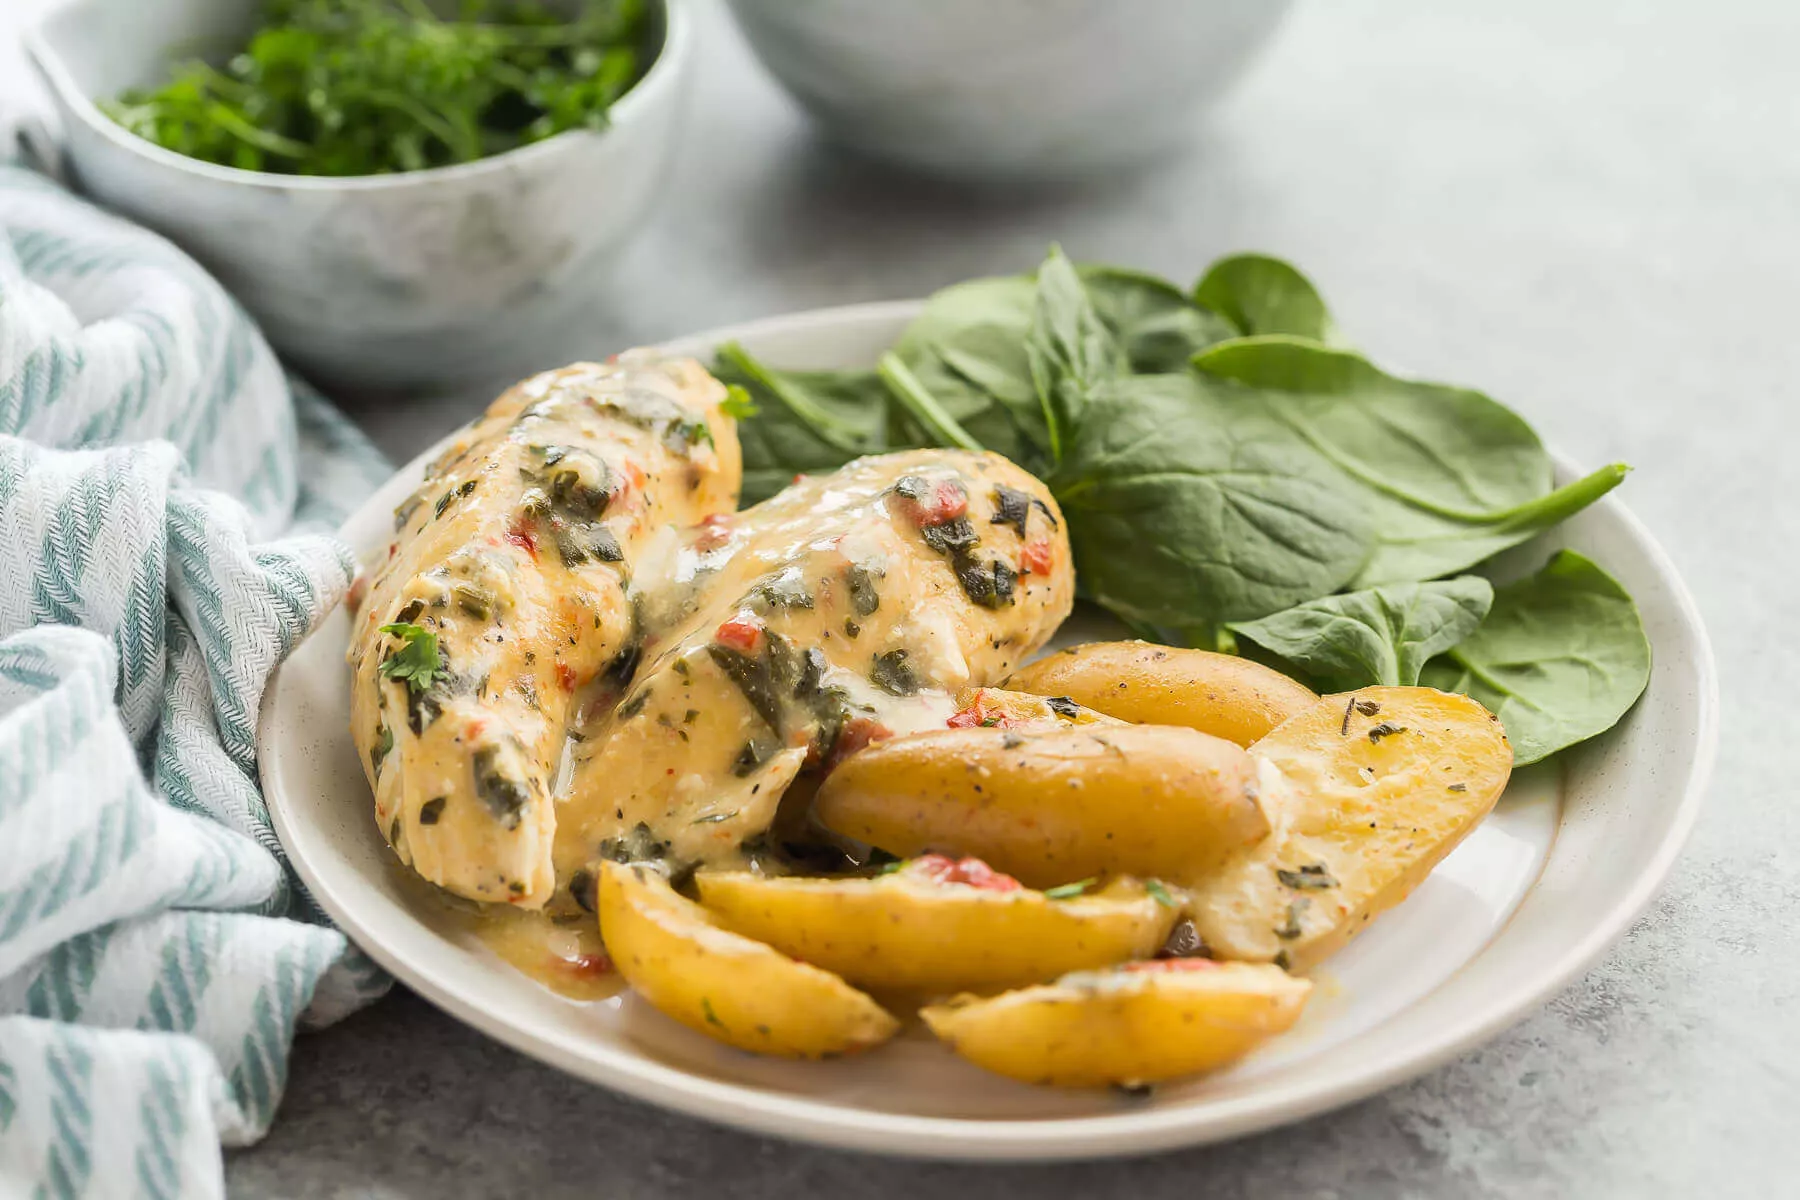 Italian slow cooker chicken and potatoes on a plate.